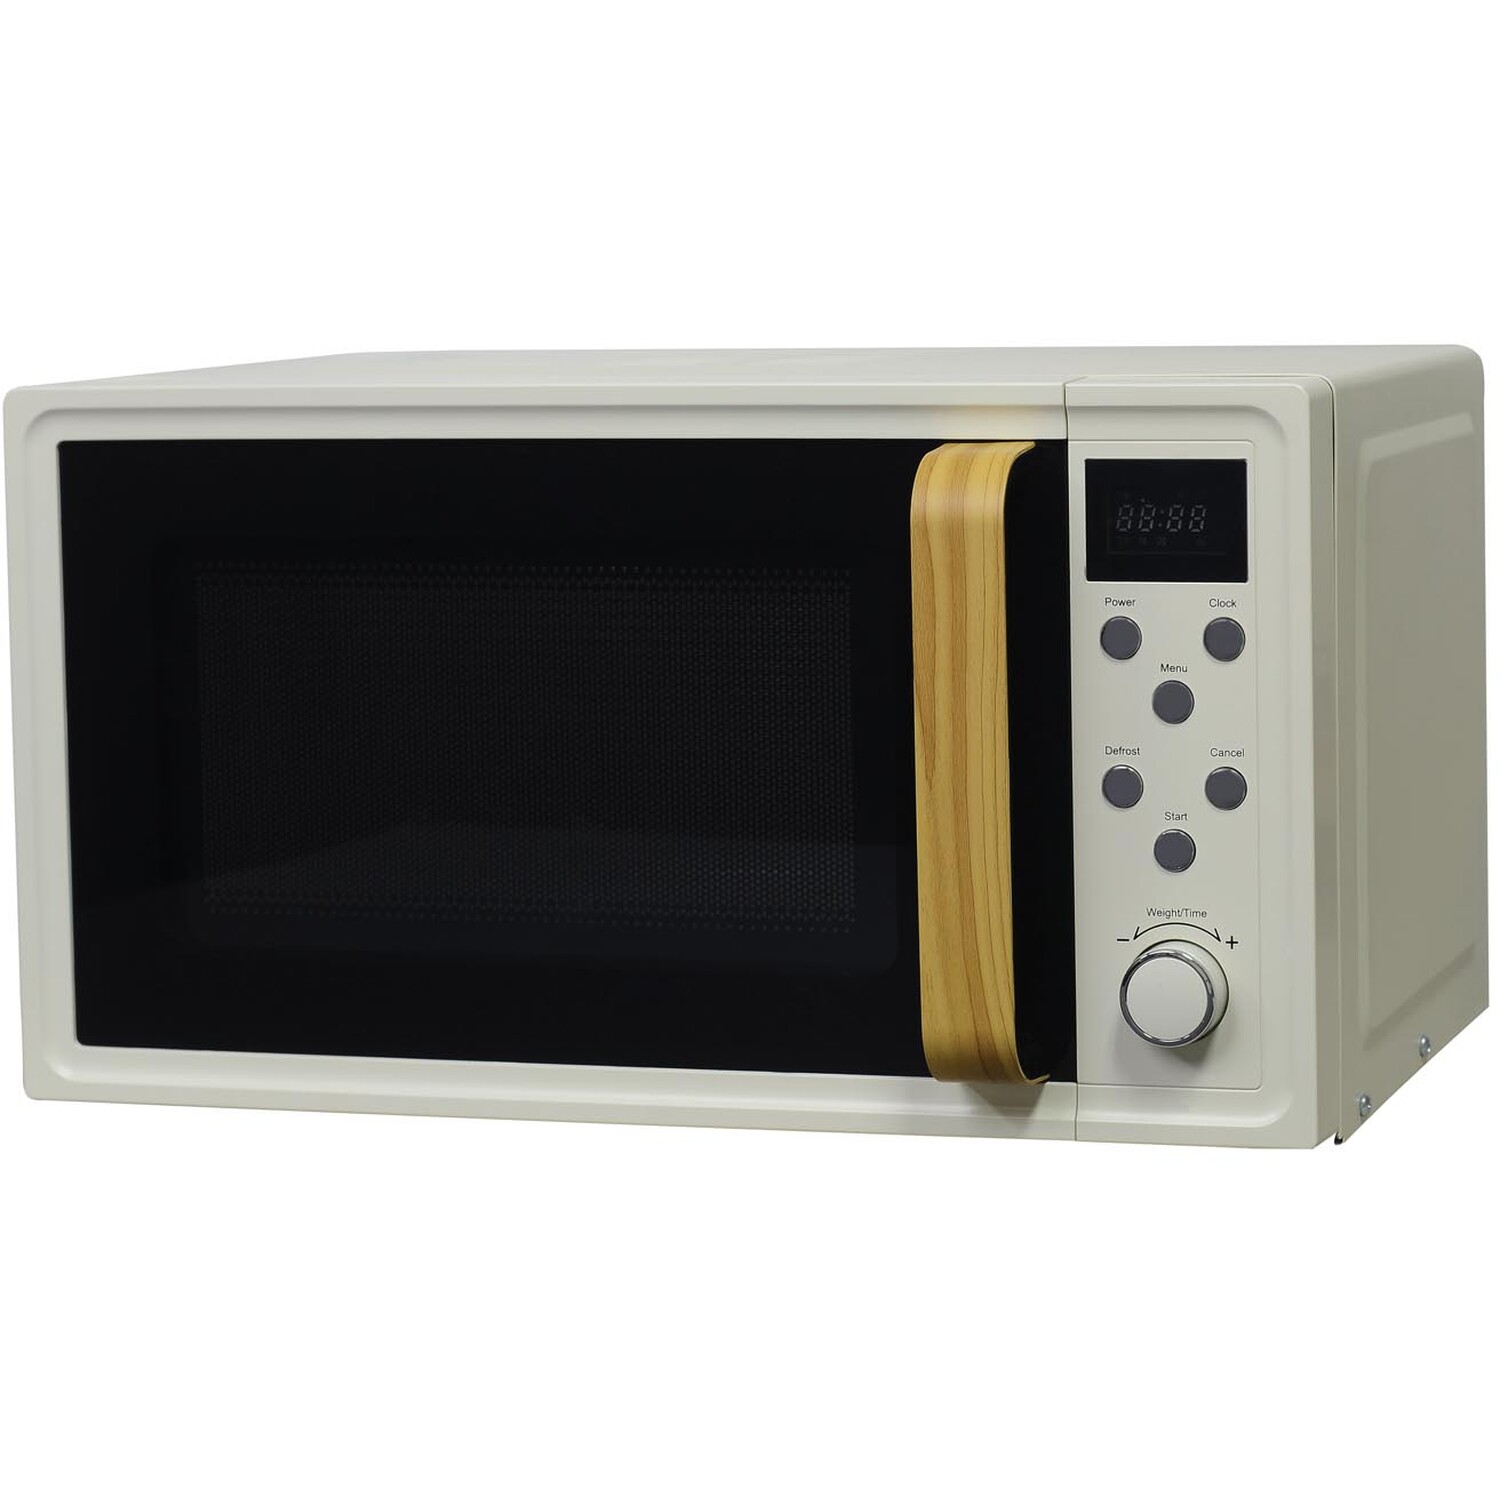 Oslo Cream and Wood Effect 20L Microwave Image 1